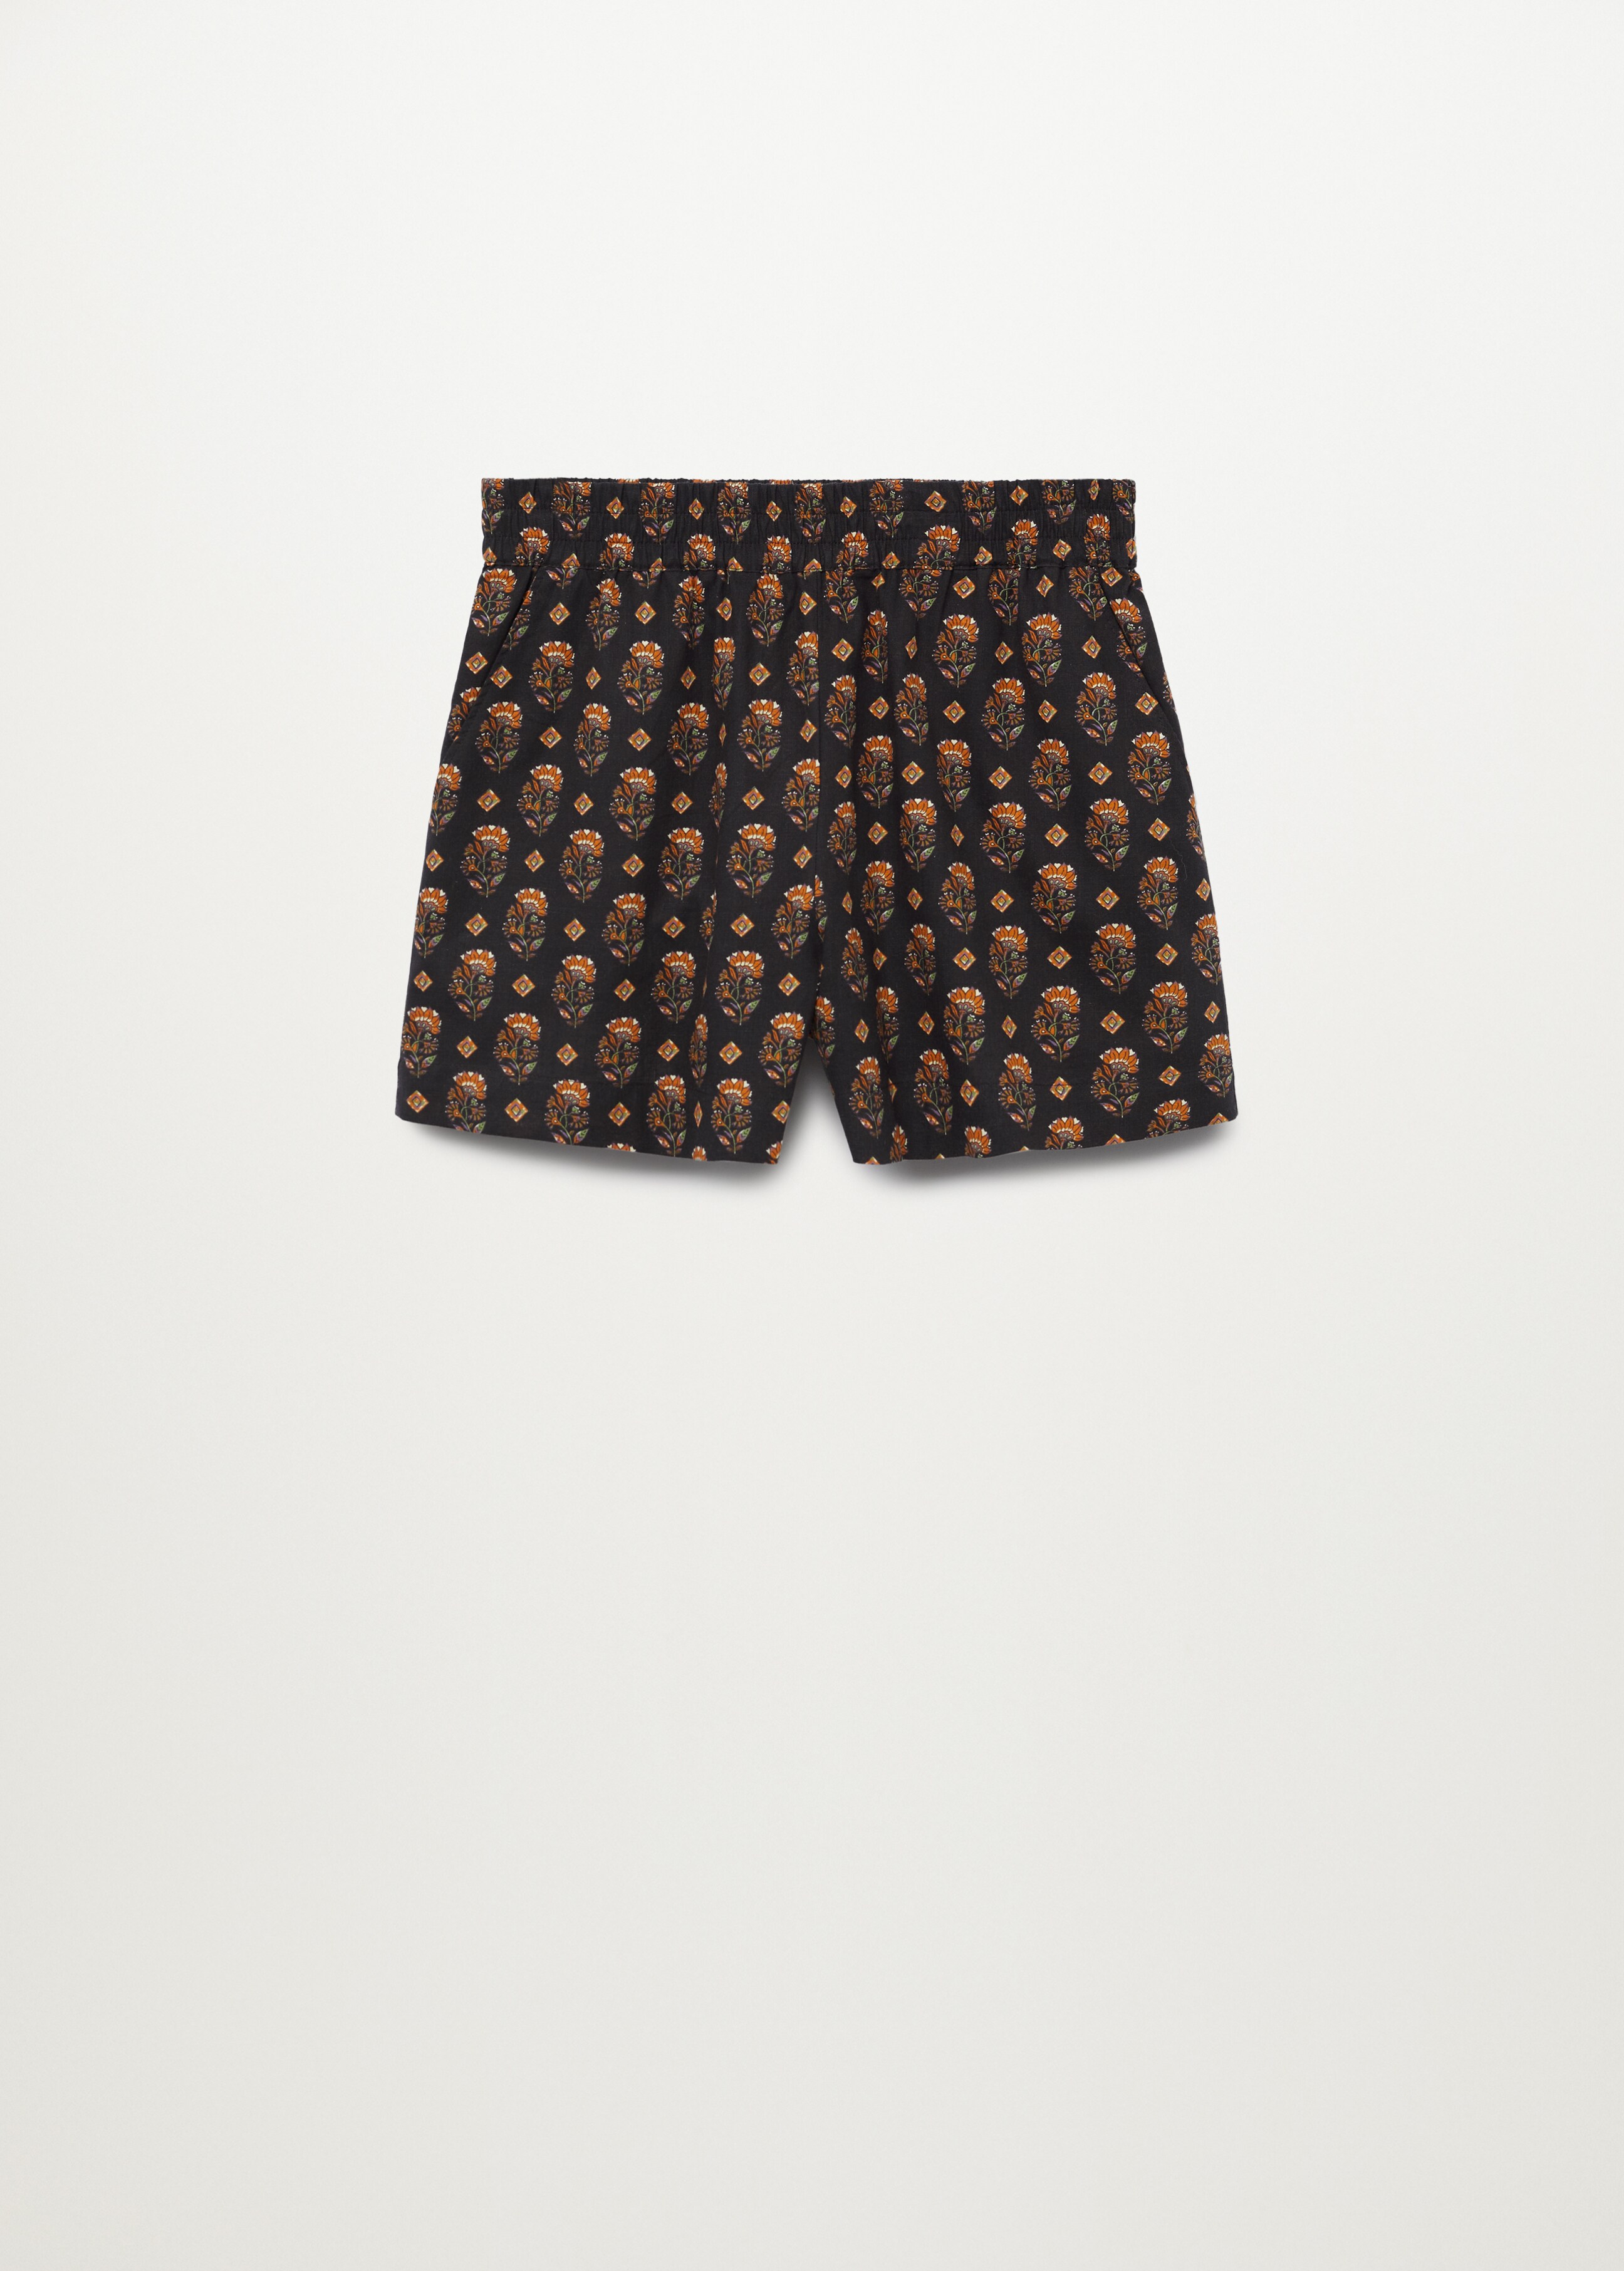 100% cotton printed shorts - Article without model